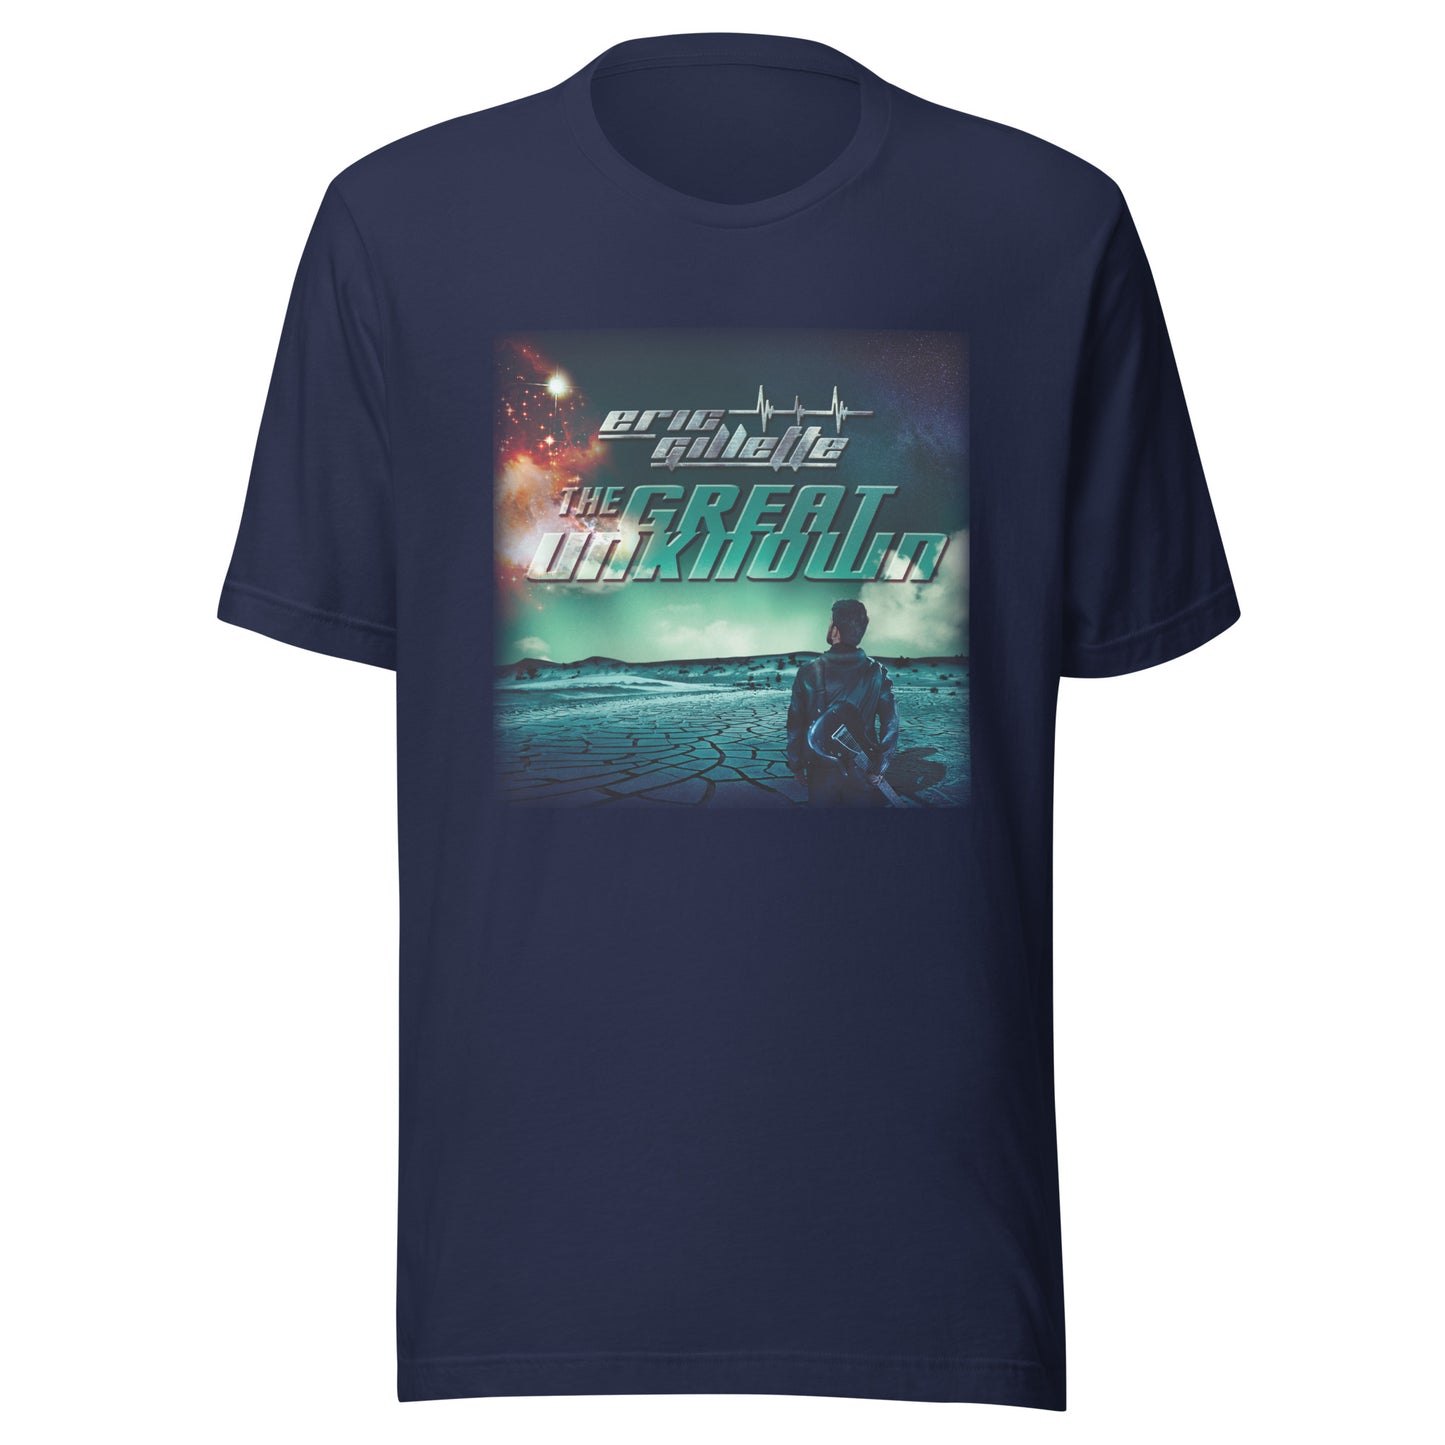 The Great Unknown Album Cover Unisex T-shirt